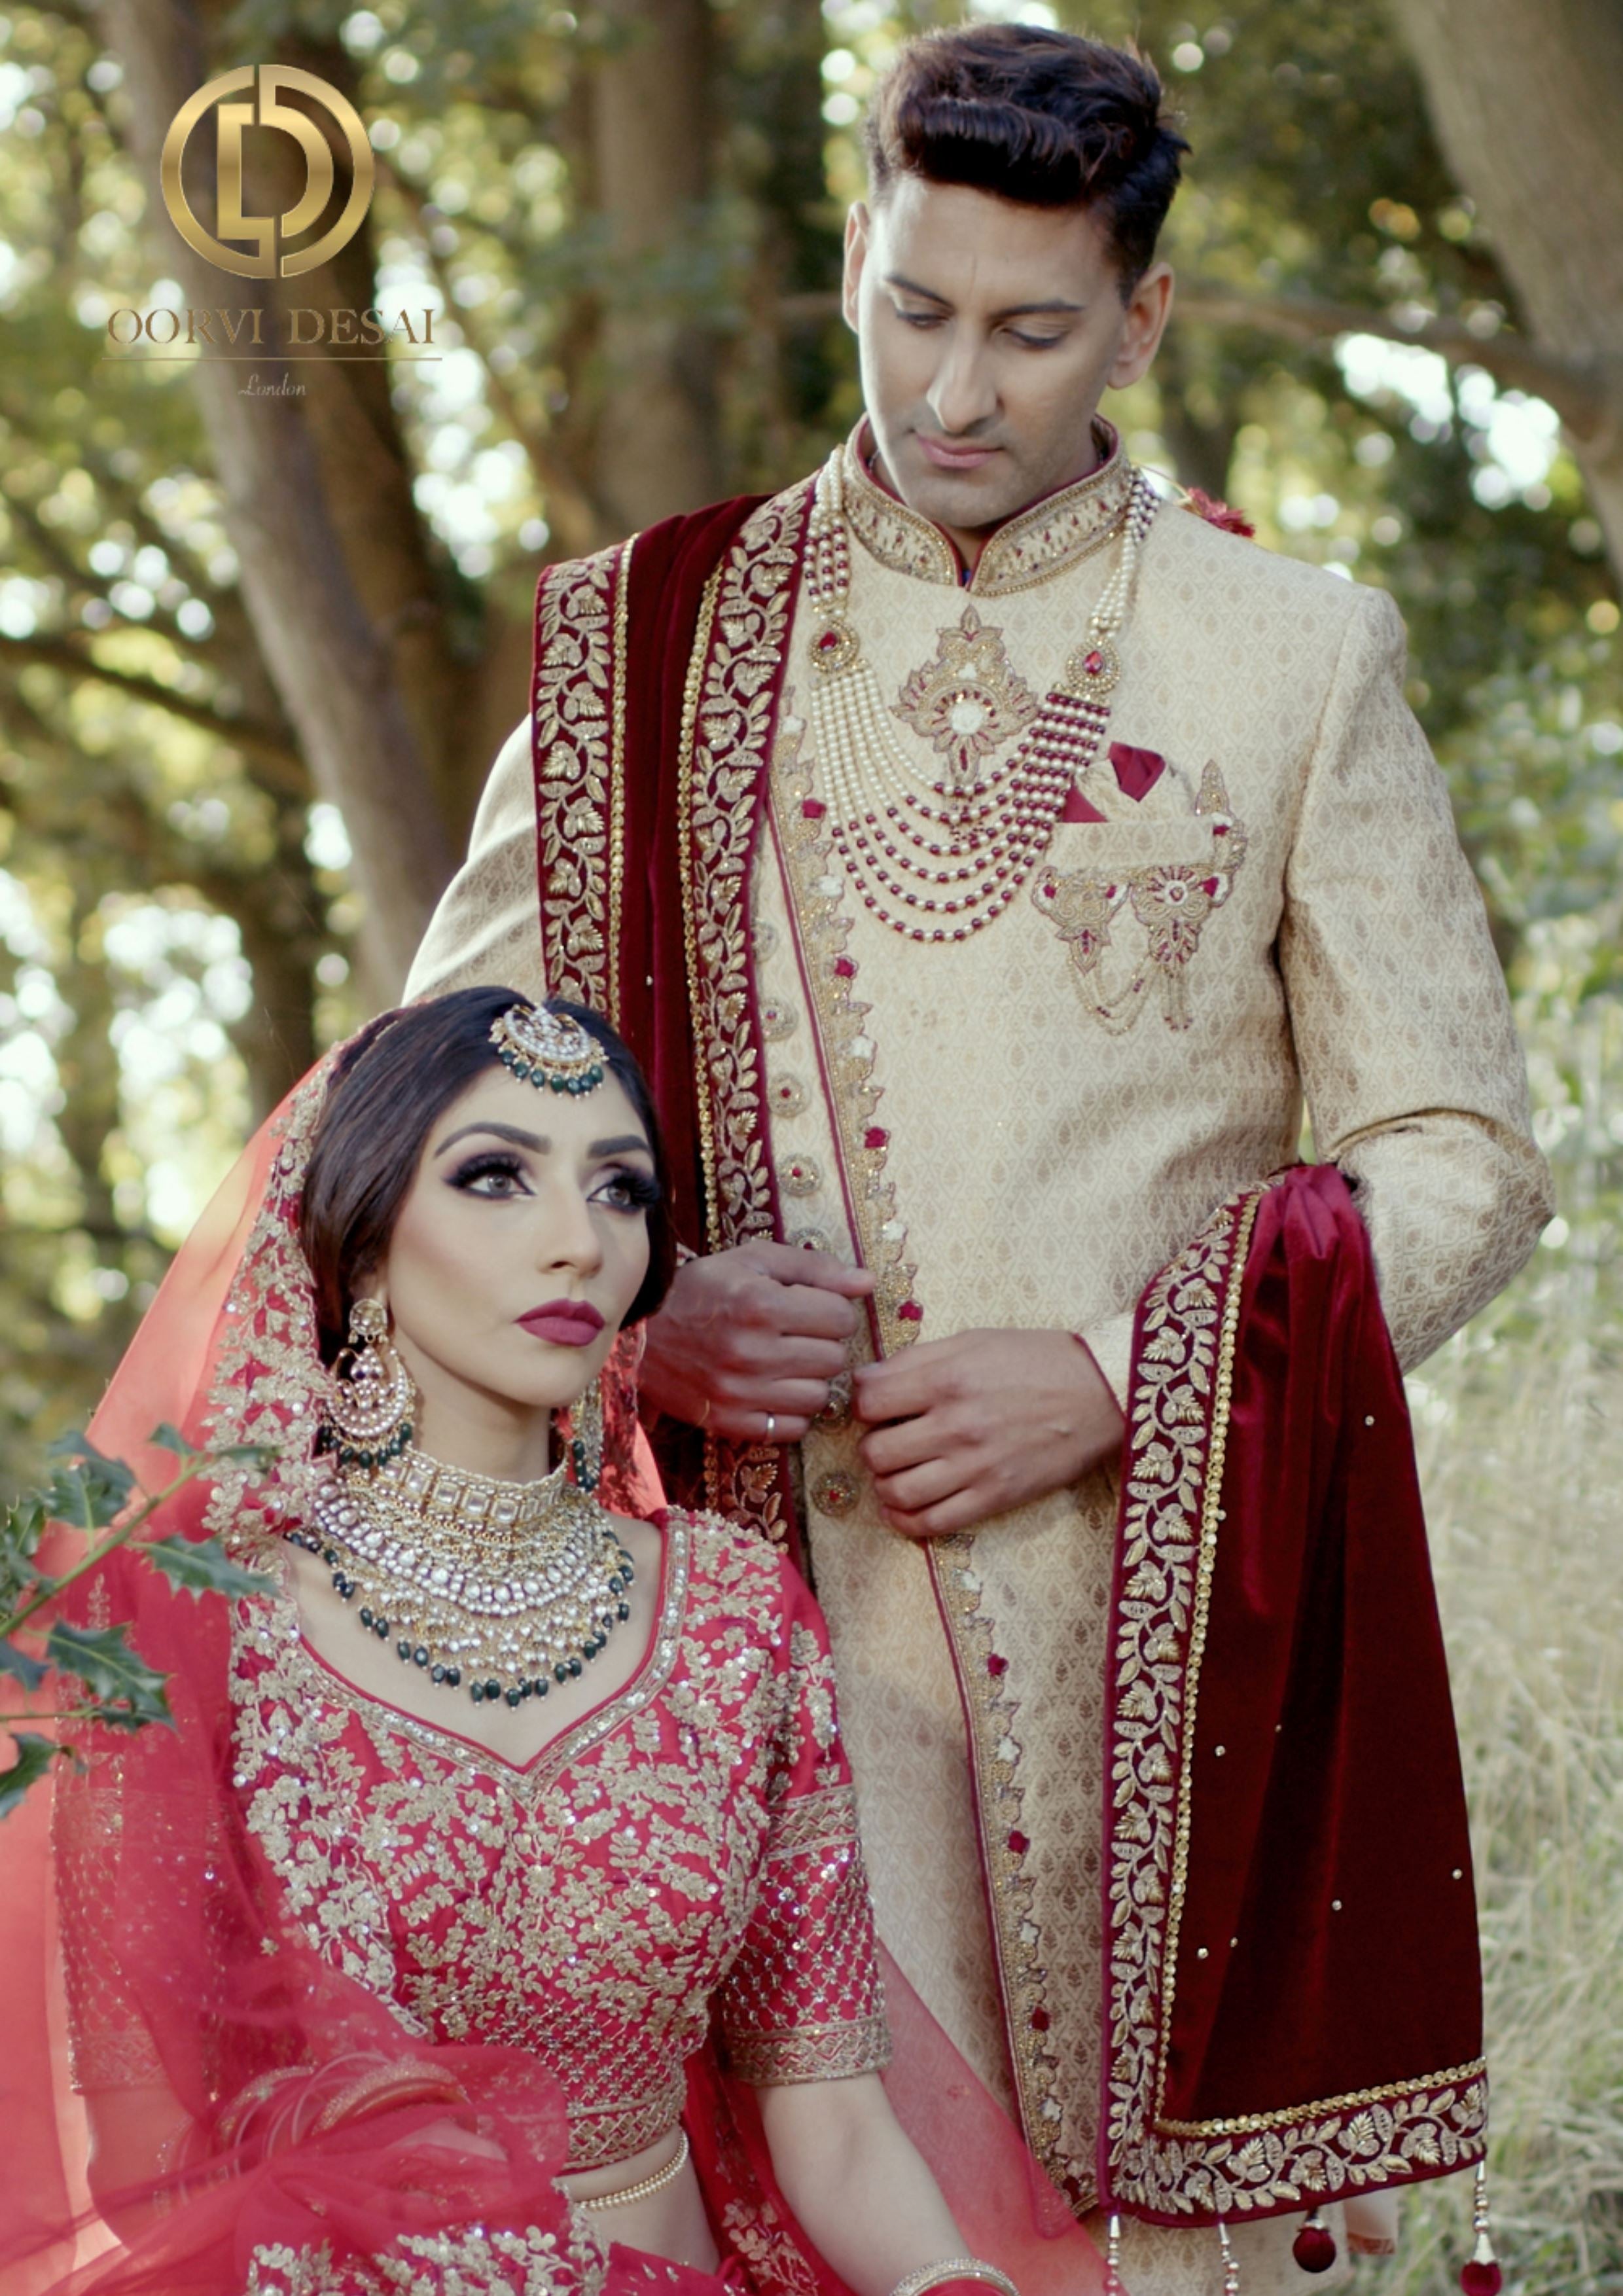 What to Wear to an Indian Wedding as a Guest - hitched.co.uk